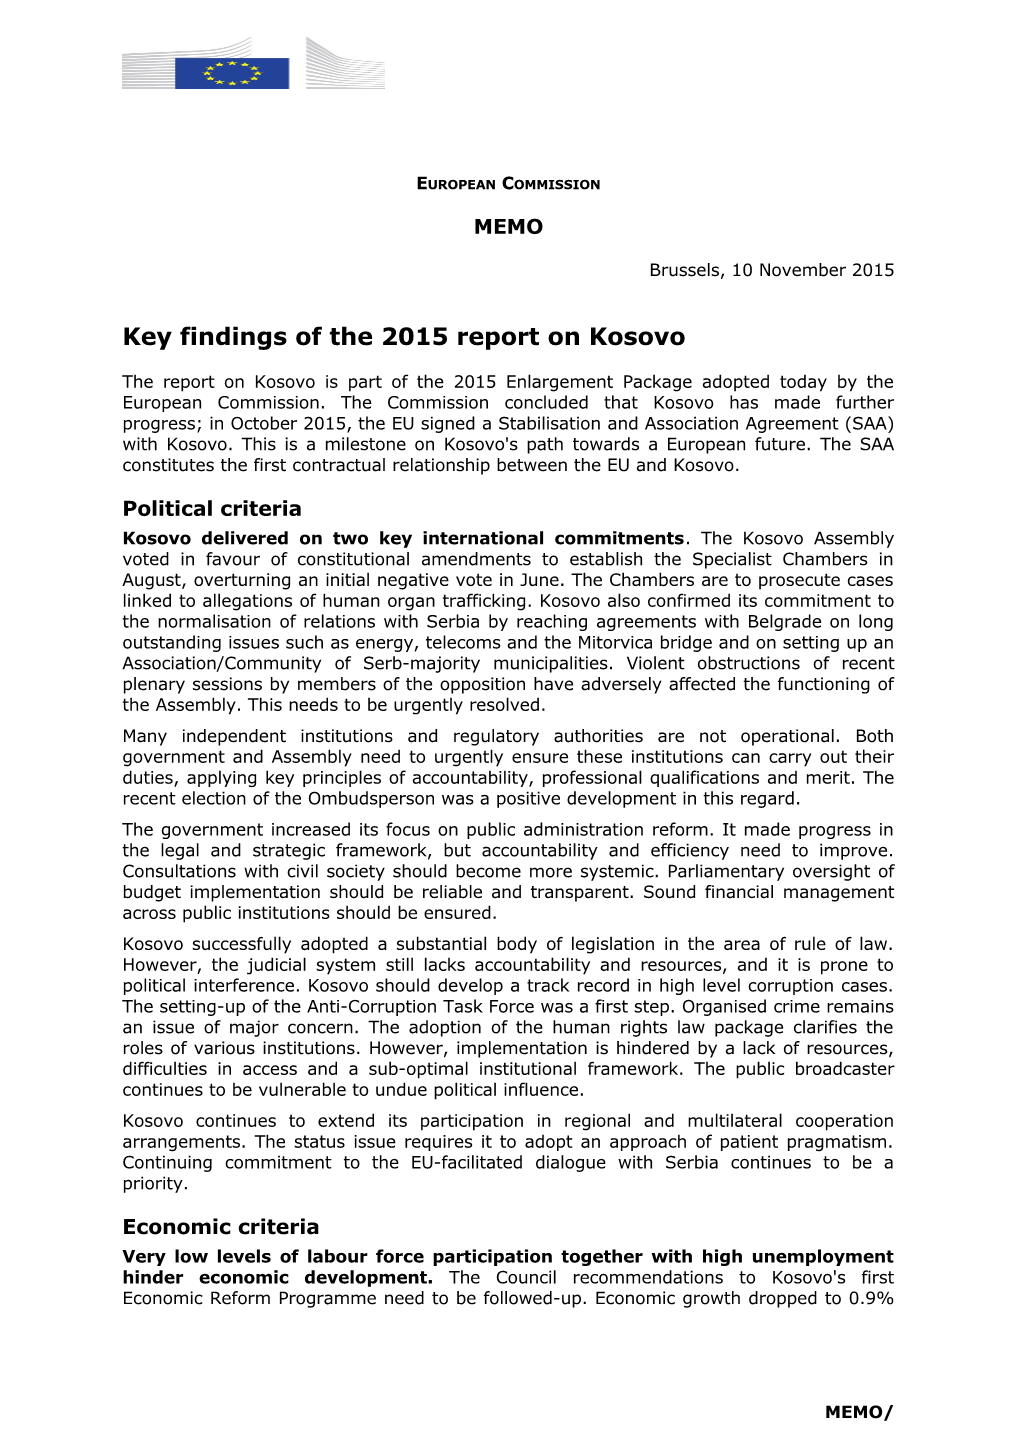 Key Findings of the 2015 Report on Kosovo